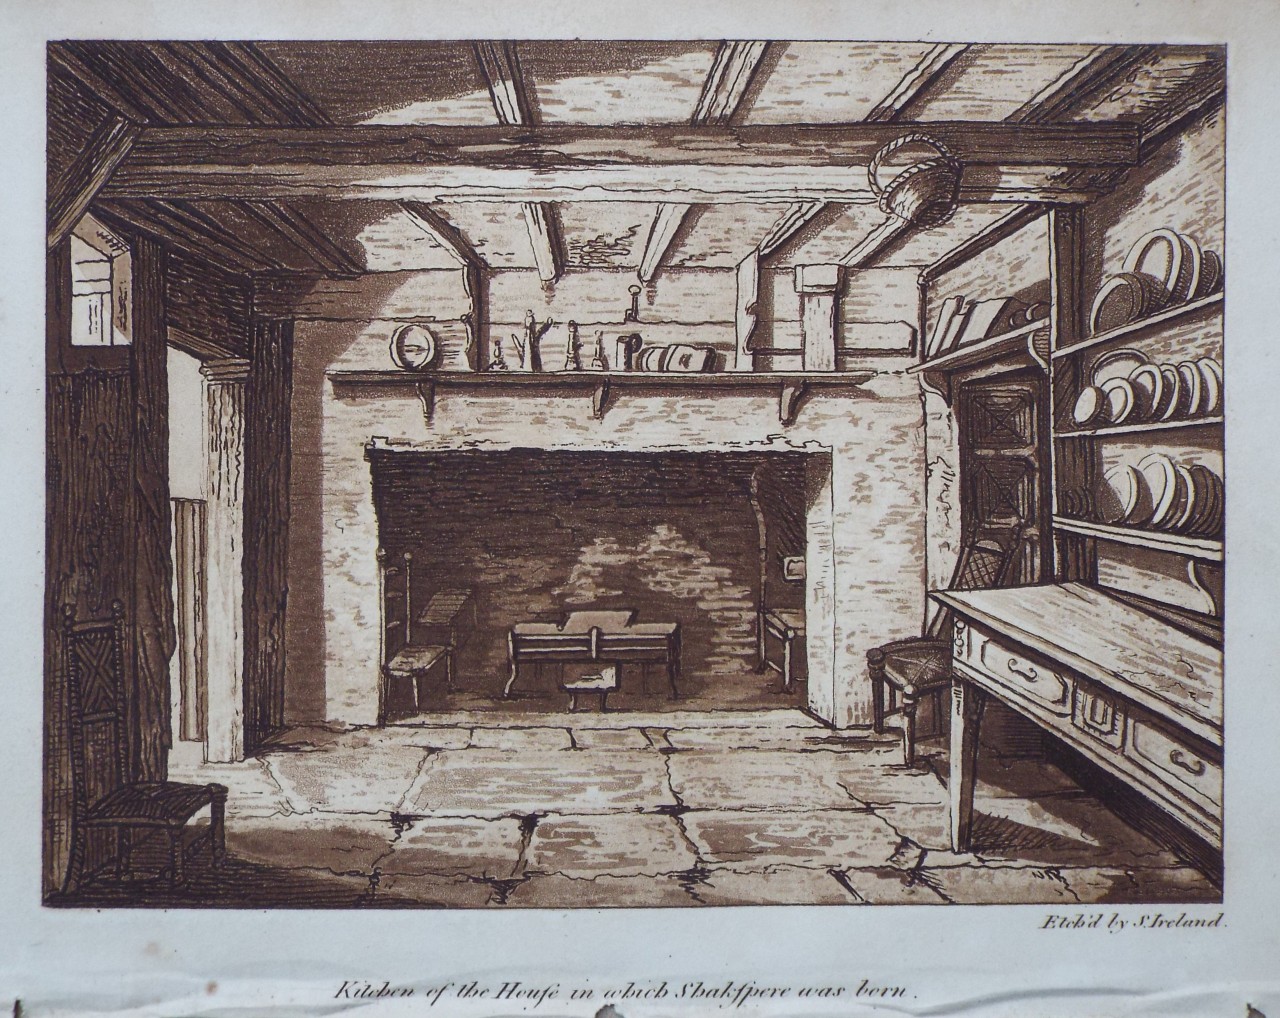 Aquatint - Kitchen of the House in which Shakspere was born. - Ireland